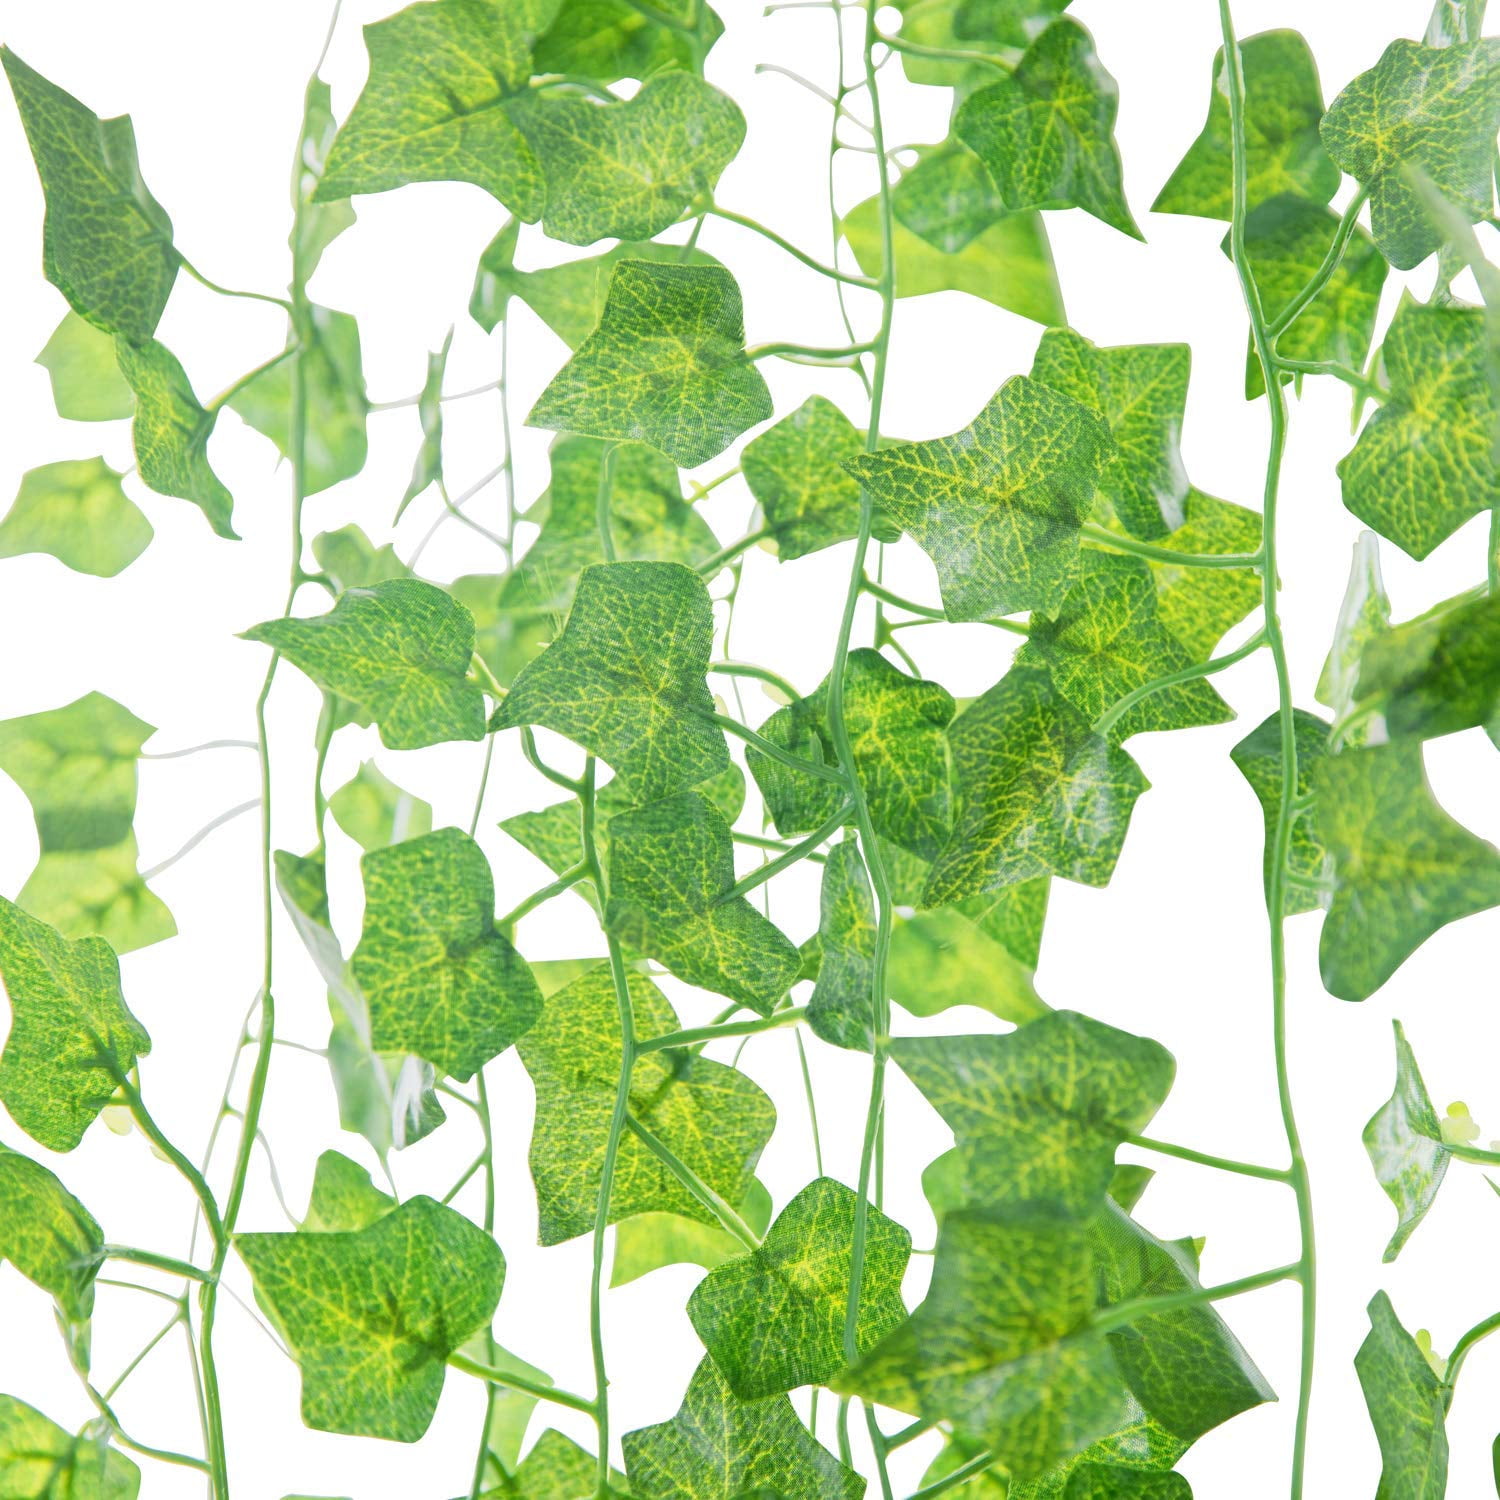 Home Decor Wall Hanging Vine Artificial Ivy Leaves Garland Plants Fake Foliage